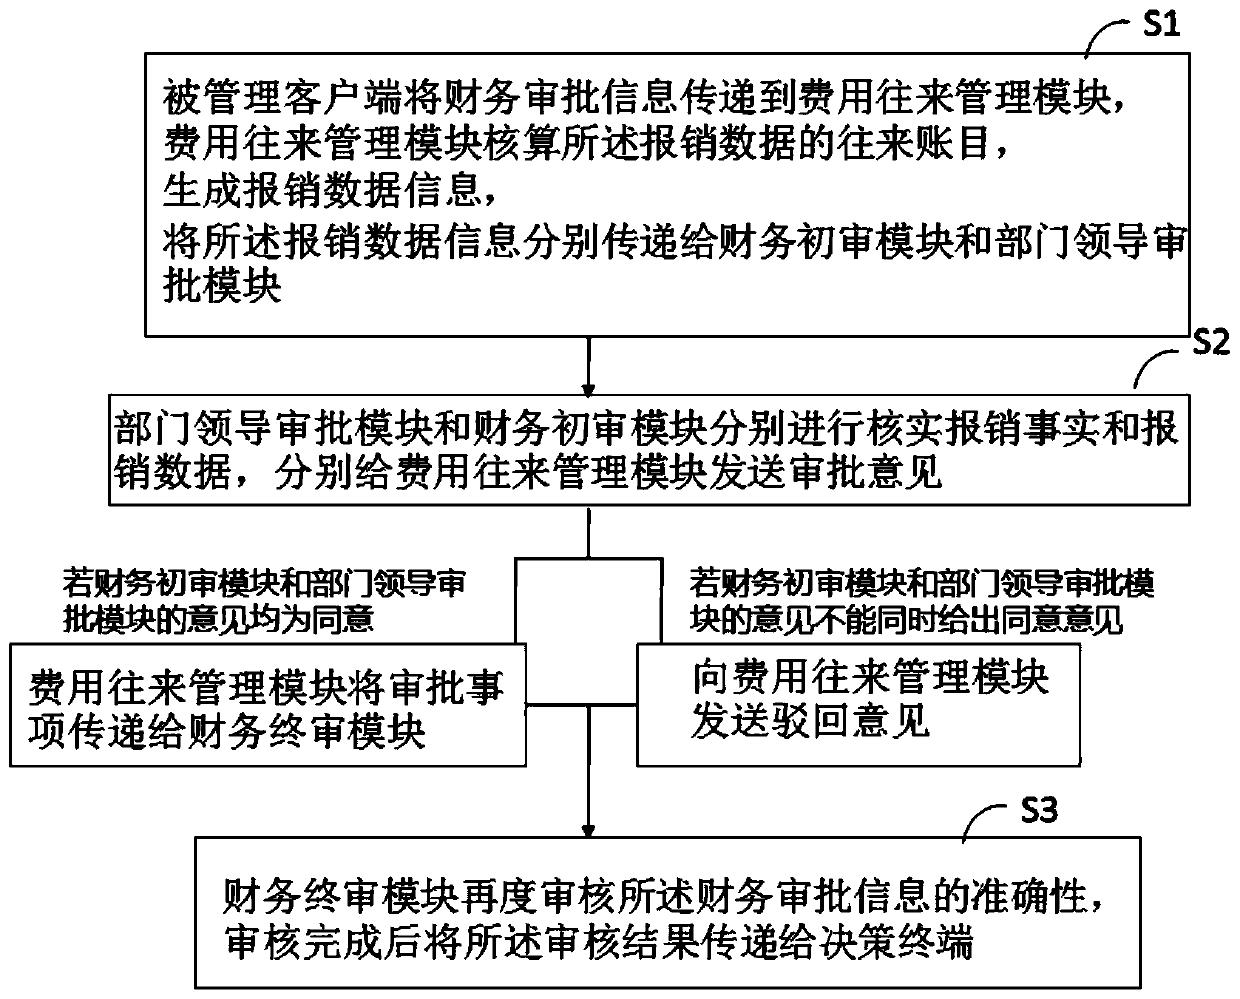 Financial approval management system and method